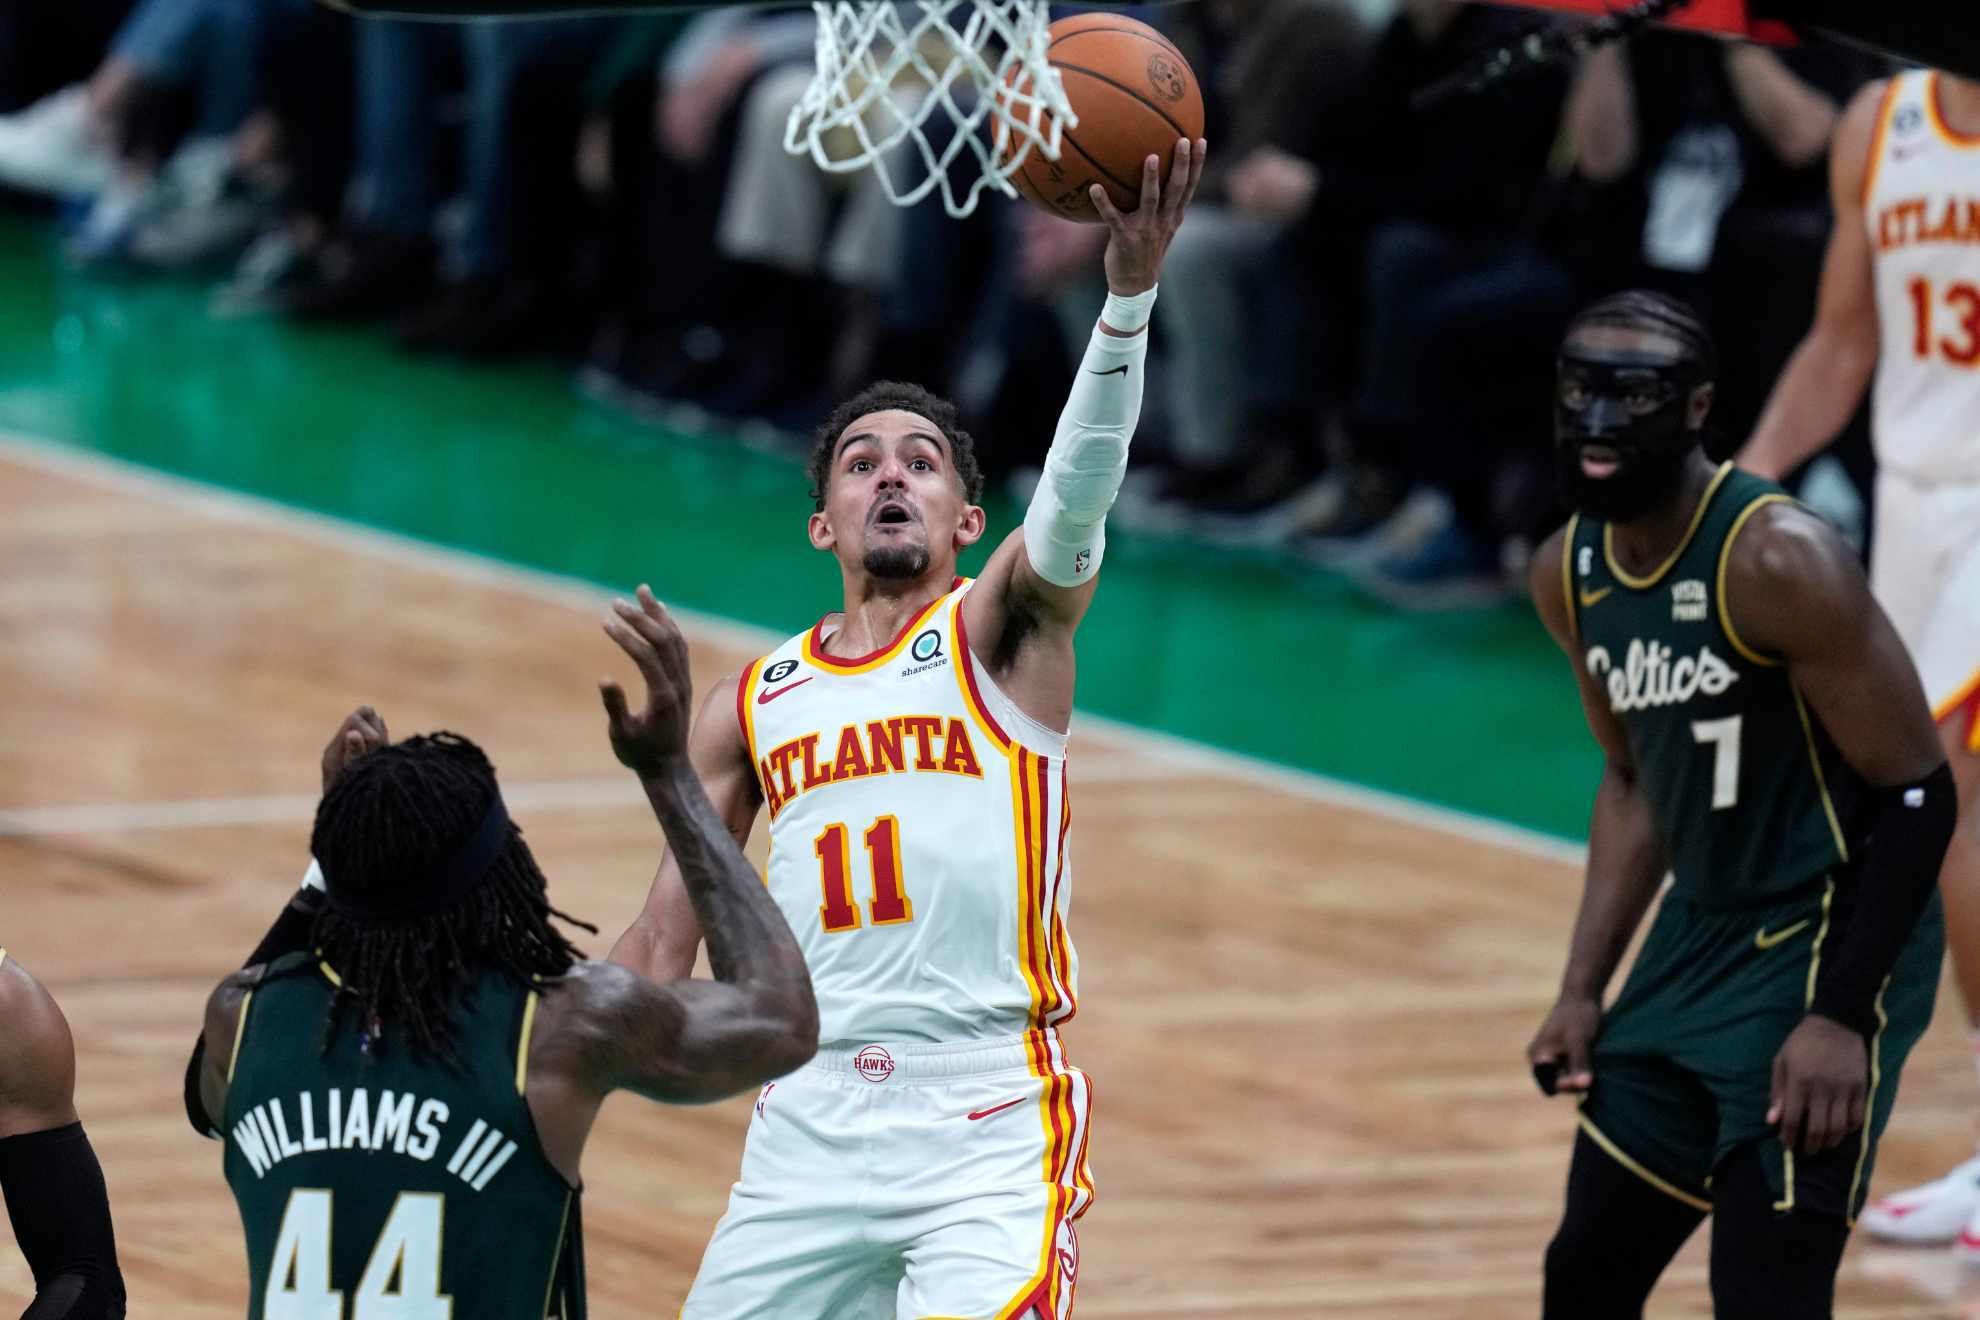 Hawks star Trae Young drives to the basket against Boston Celtics center Robert Williams III.